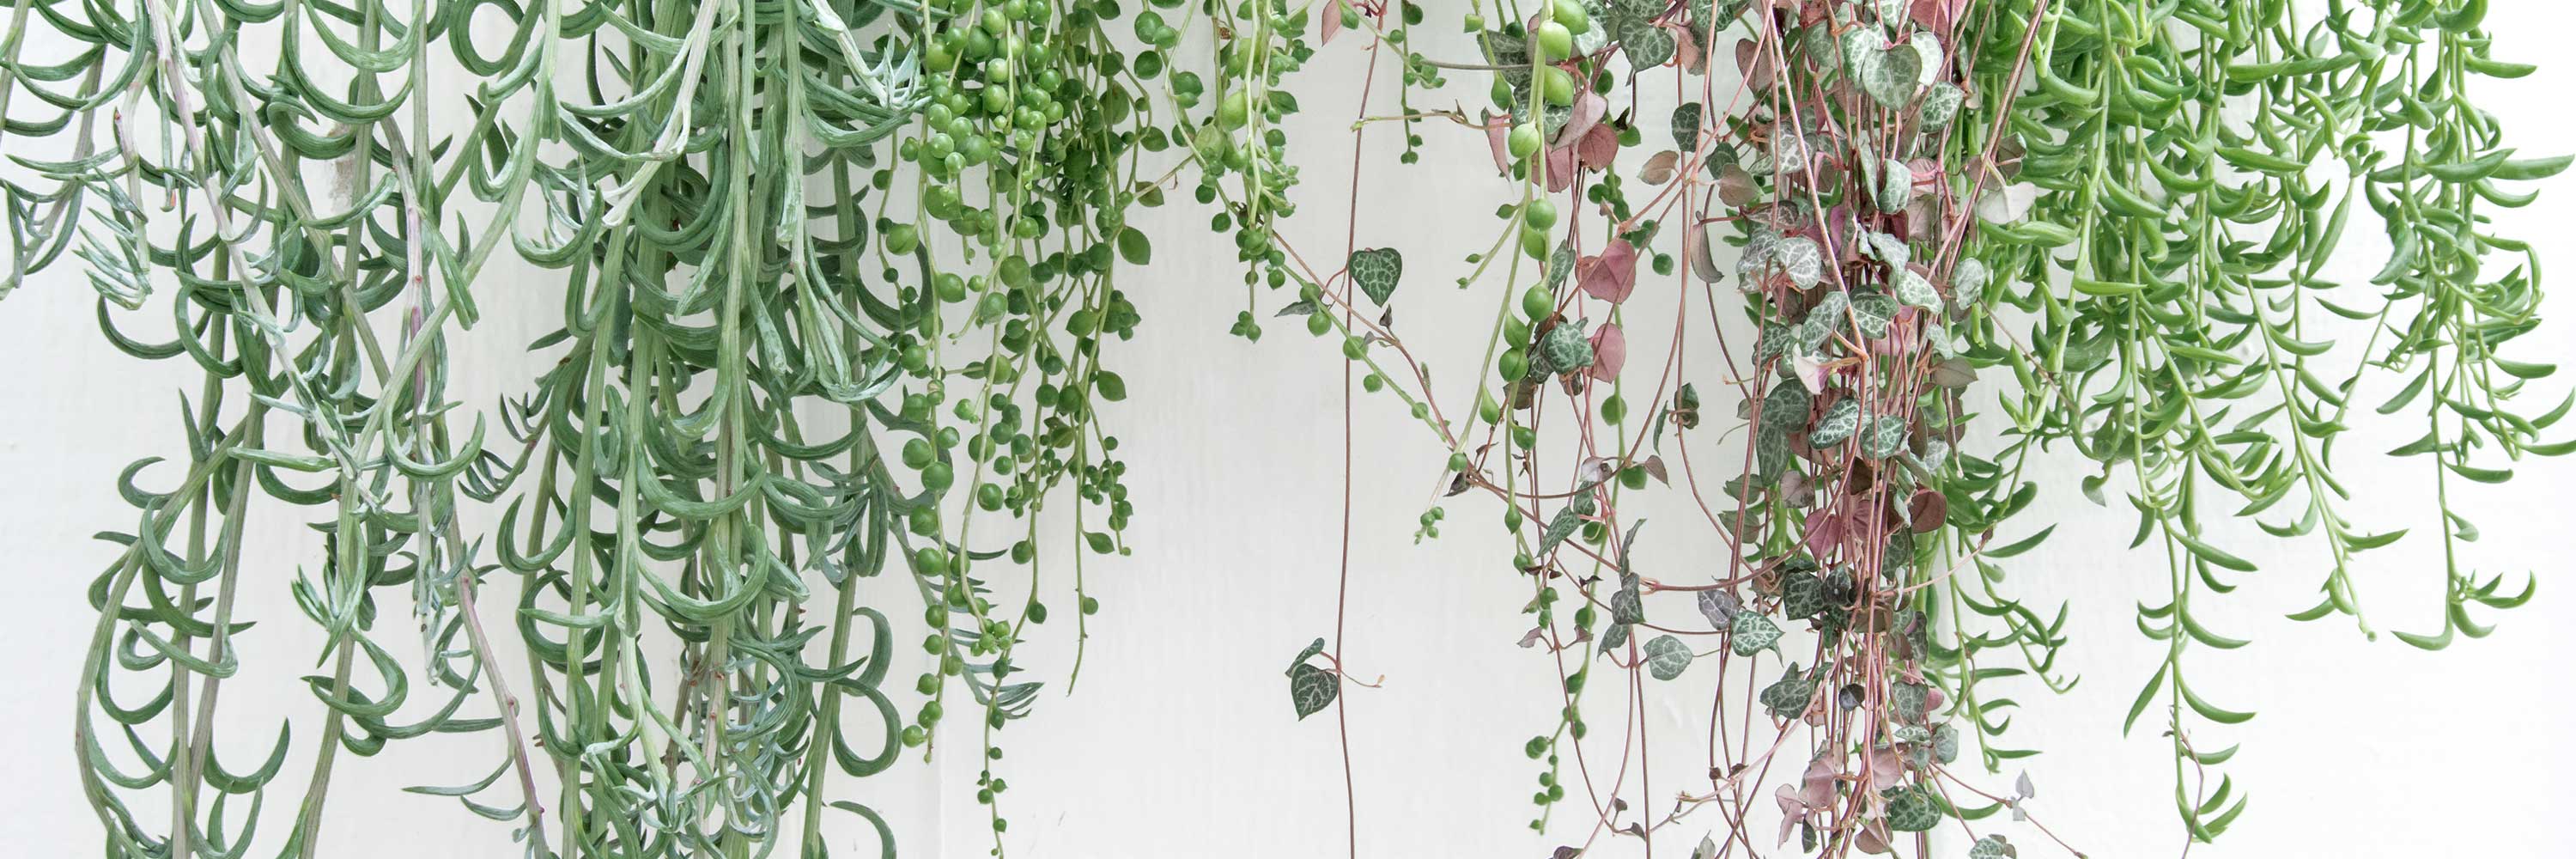 String of Pearls, Bananas, Fishhooks, Trailing Succulents